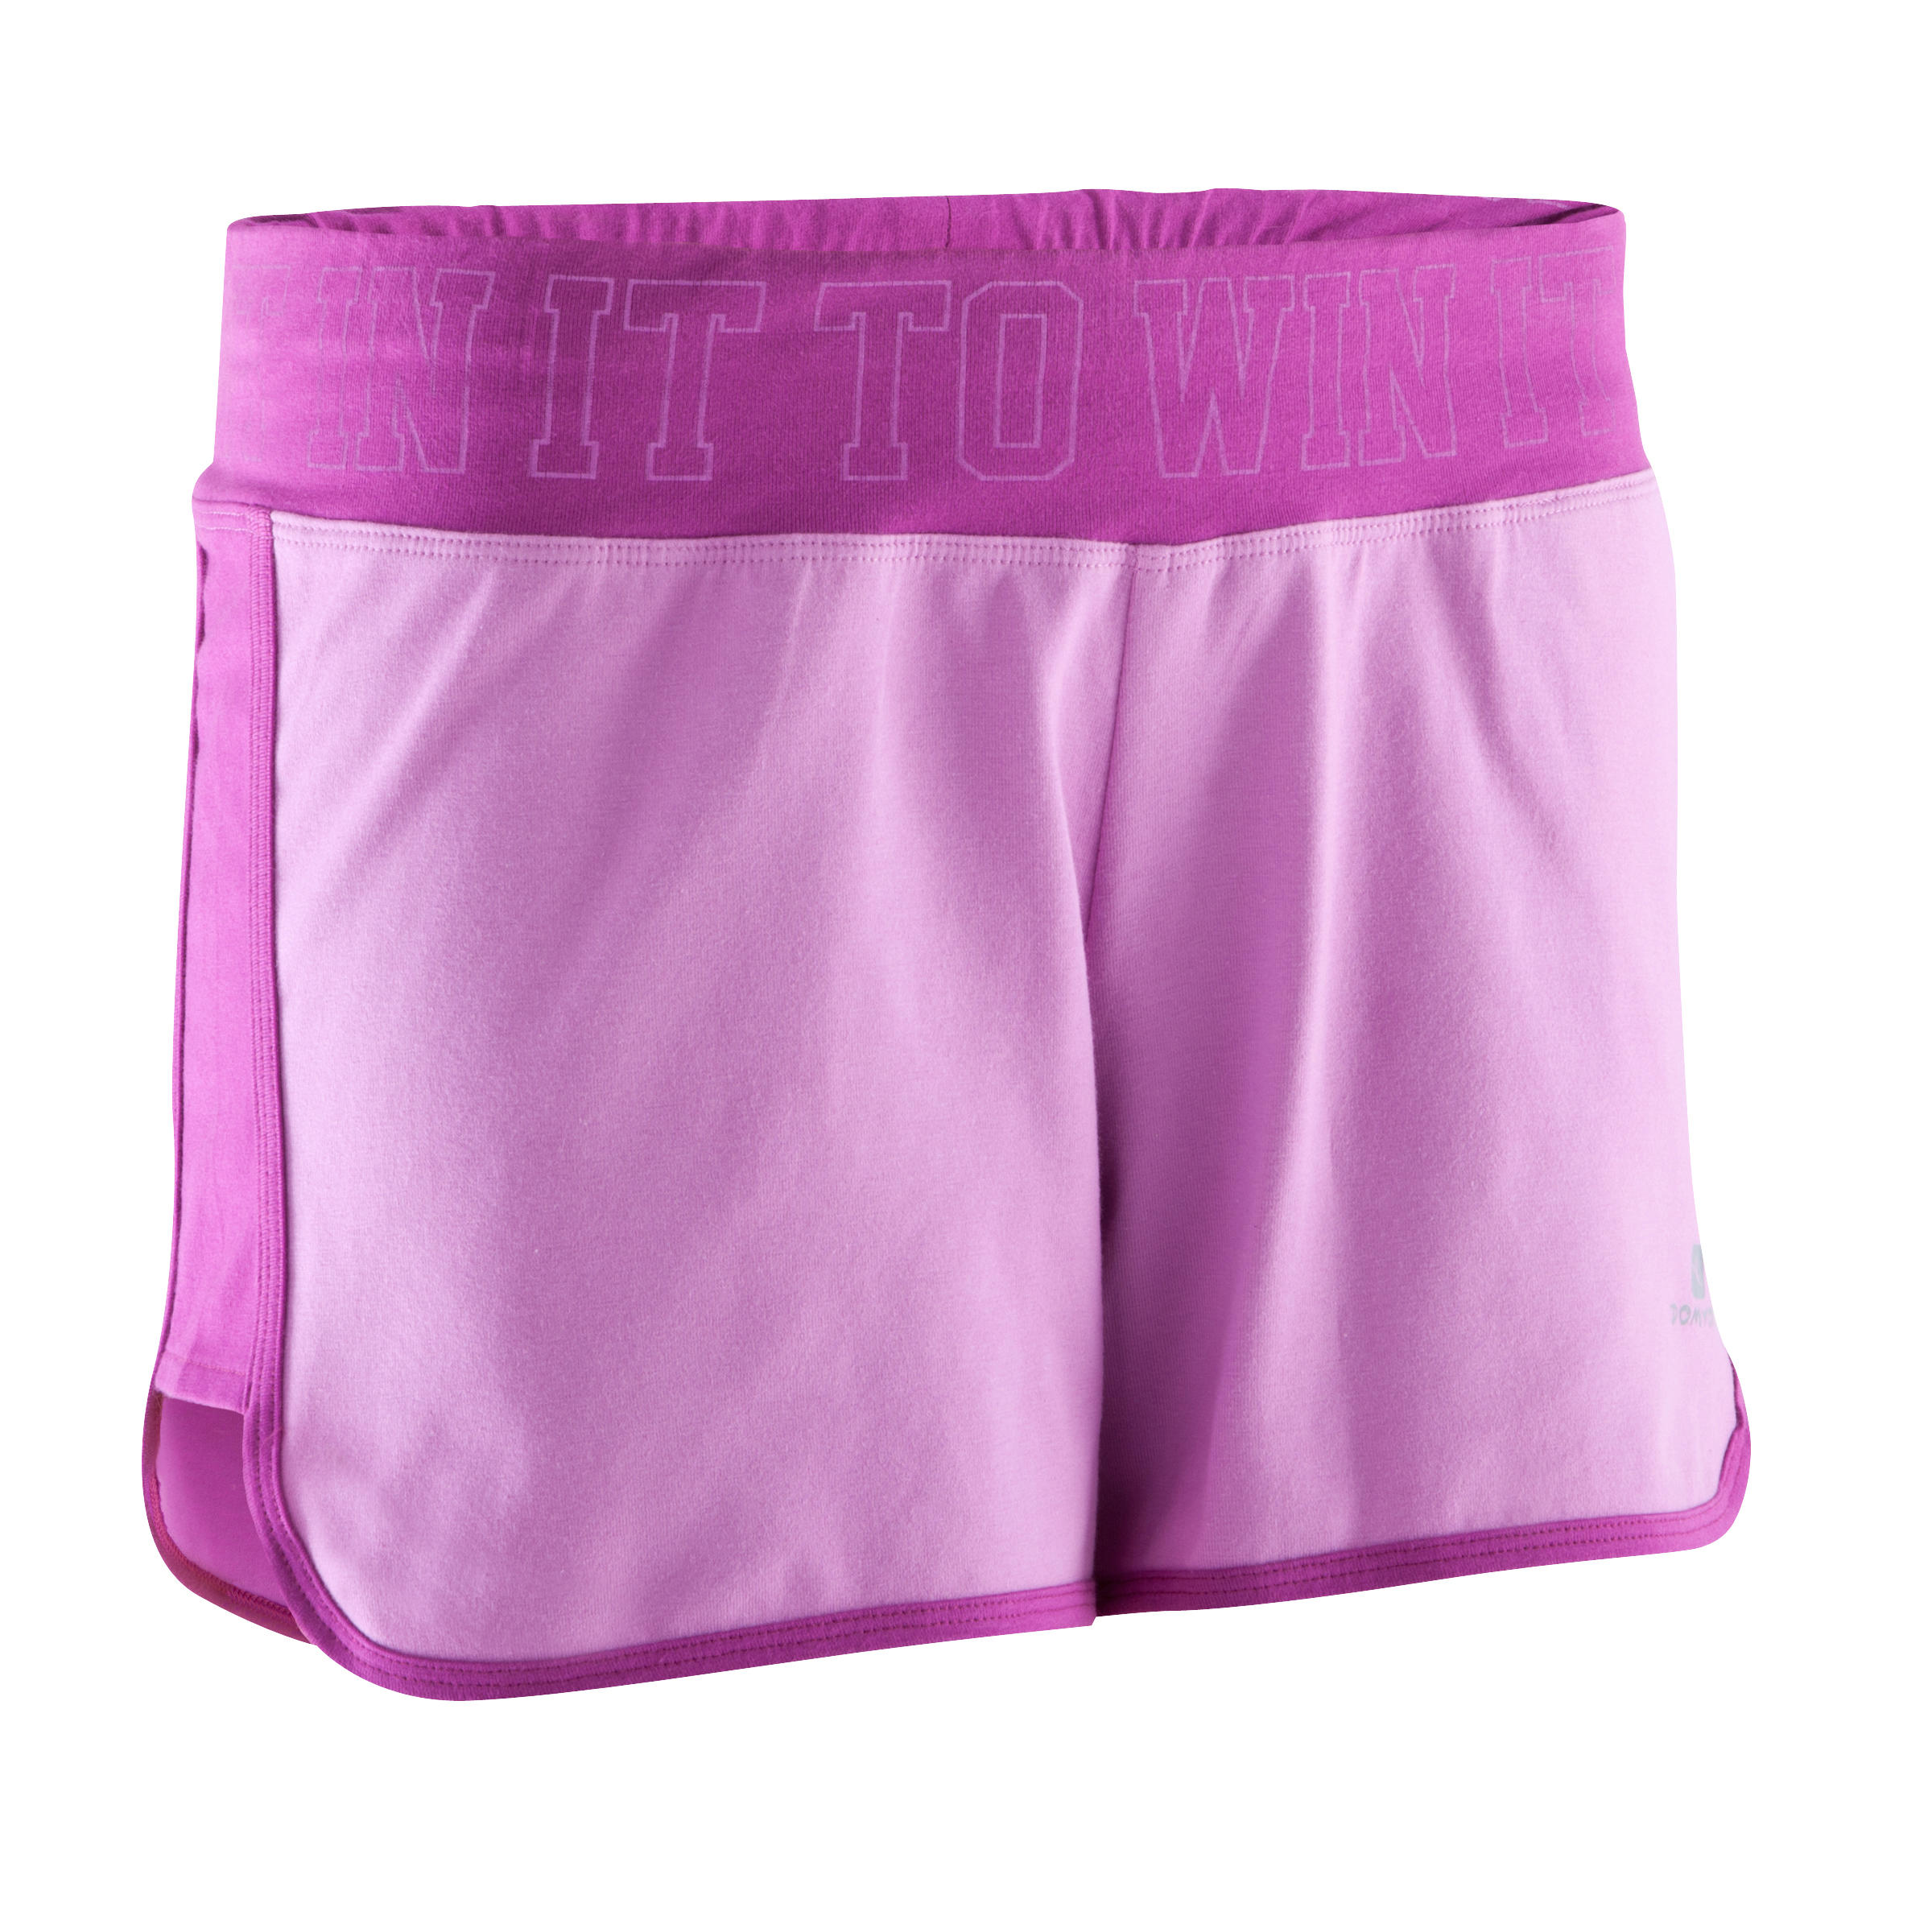 DOMYOS Women's Fitness Shorts with Contrasting Print Waistband - Mauve/Dark Pink